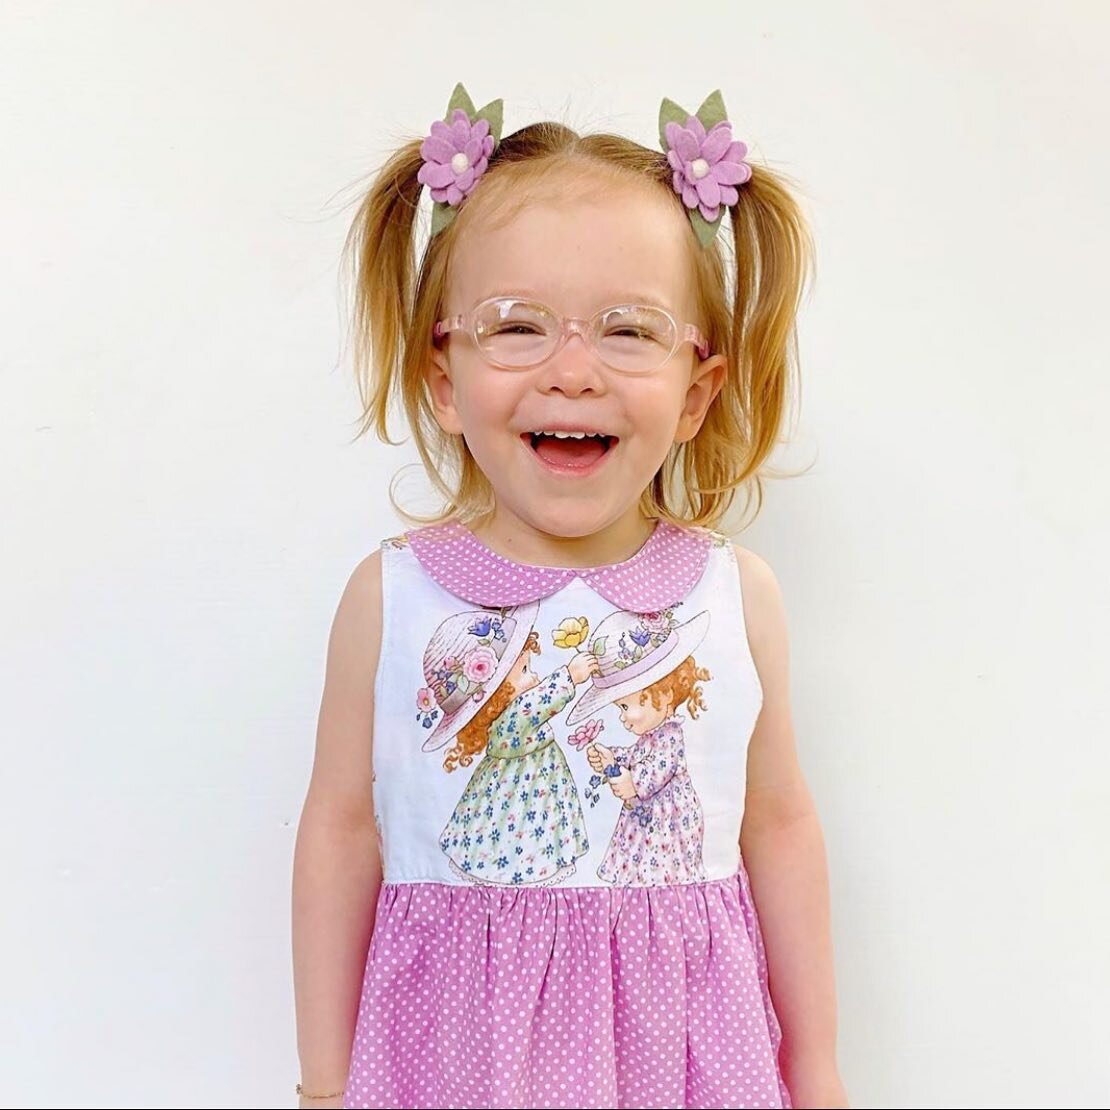 If the Spring weather wasn&rsquo;t enough to brighten your day, we&rsquo;re sure Hazel&rsquo;s smile will be! 💛🌸

So much joy and happiness in one photo @hugo_hazel 💖💖

#tomatoglasses #tomatoglassesaustralia #glasses #eyewear #kidseyewear #kidsfr